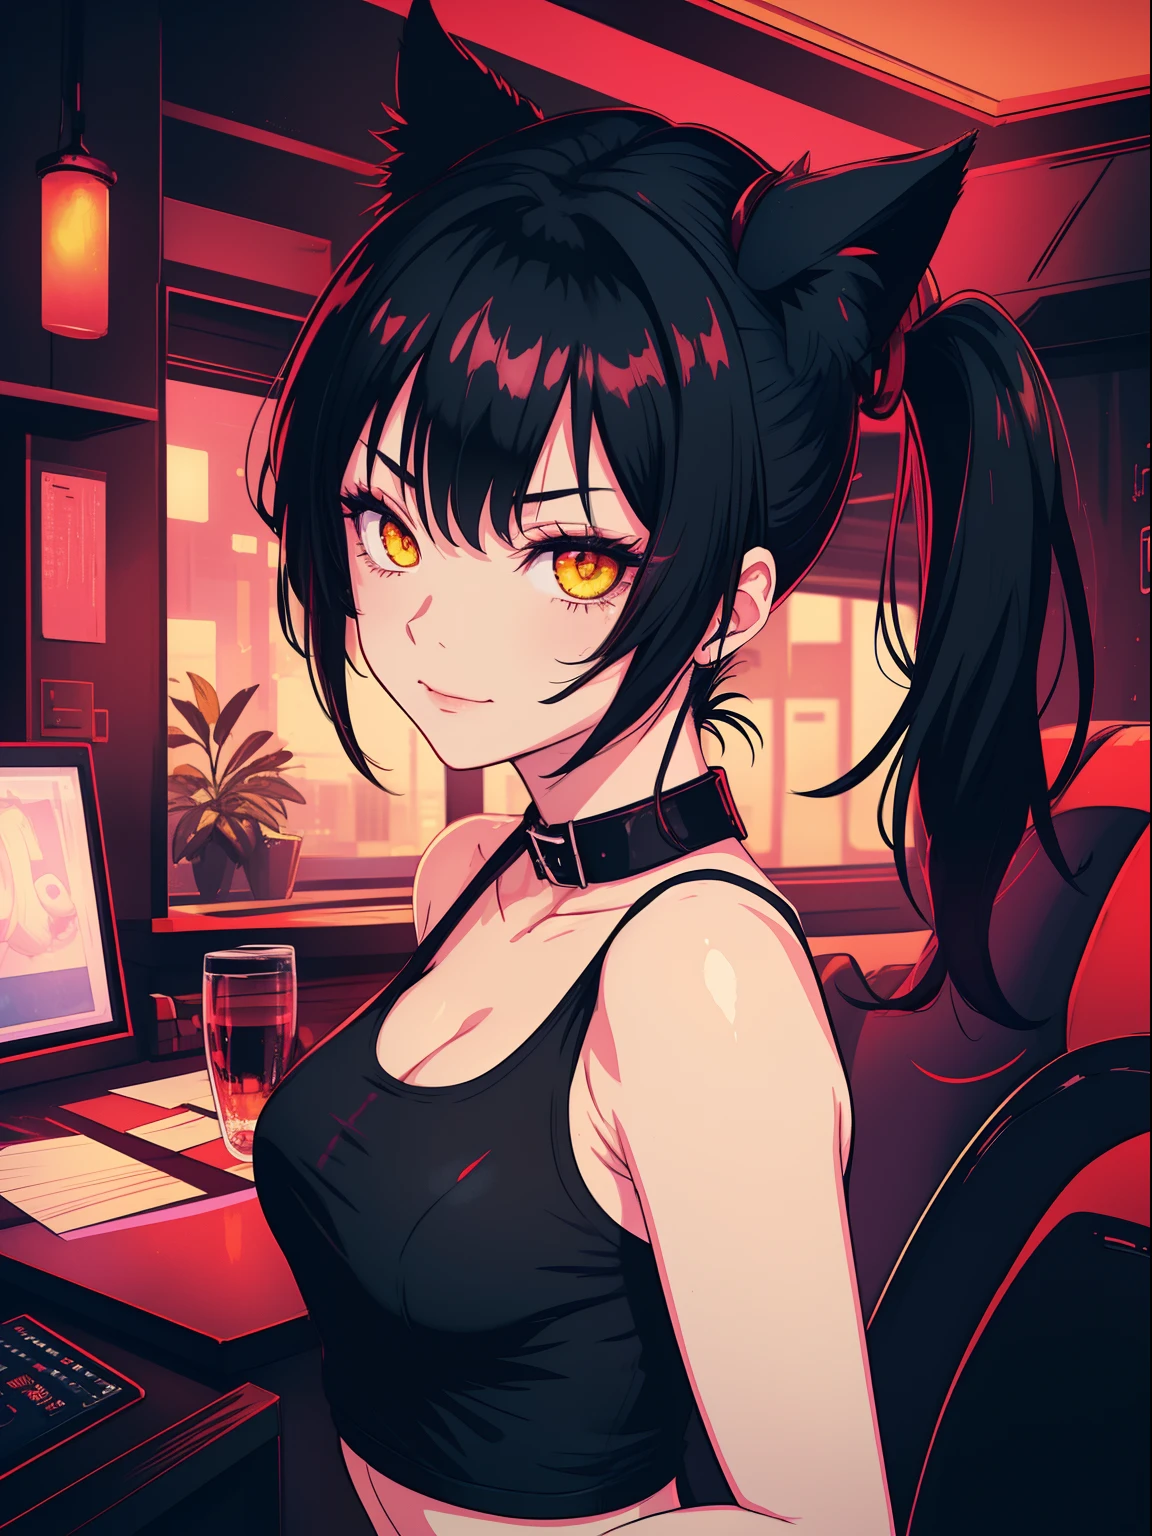 (((Portrait))), (NSFW, slim body), (best quality, 4k, 8k, high-res, ultra-detailed, anime style, pastel), catgirl, black hair, yellow glowing eyes, looking at viewer, smug, slightly smiling, goth makeup, collar, synthwave, aesthetic, vaporwave interior, red lightning, red interior, succubus, red light, dark red lights, black tank top, black leggings